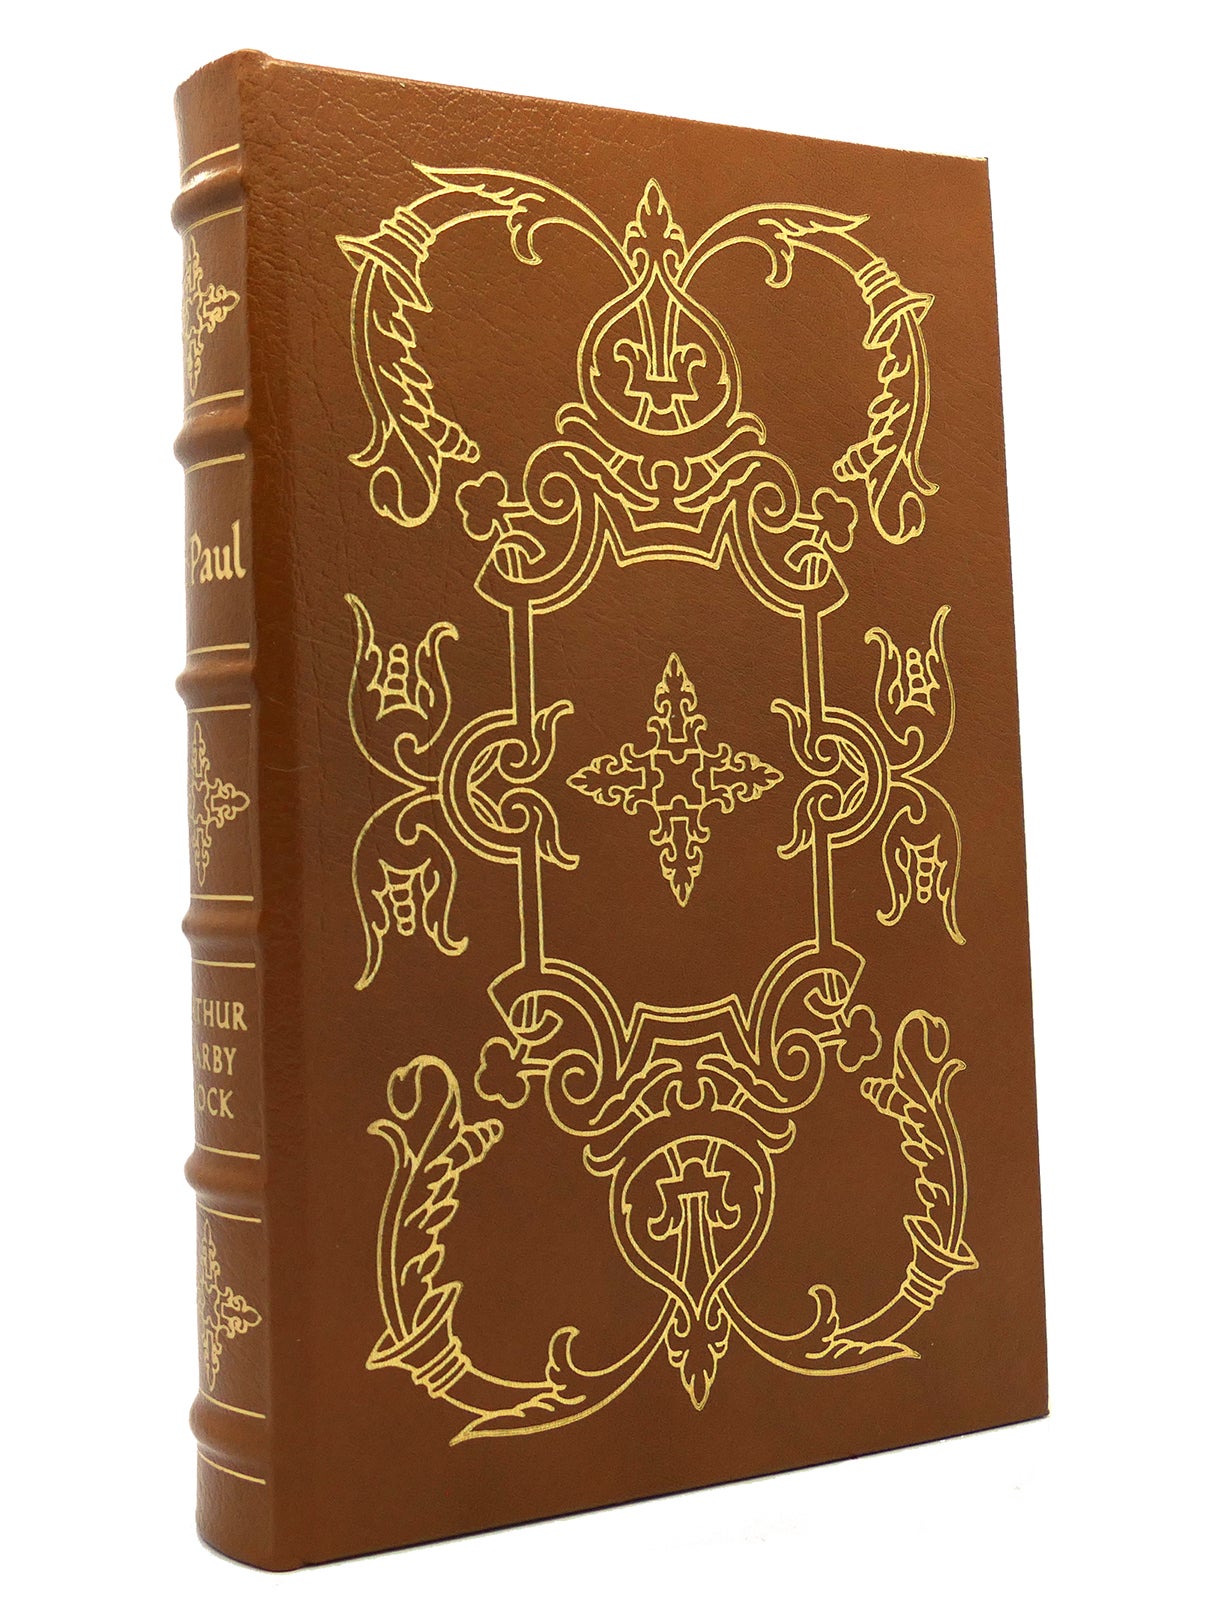 ST. PAUL Easton Press | Arthur Darby Nock | First Edition; First Printing